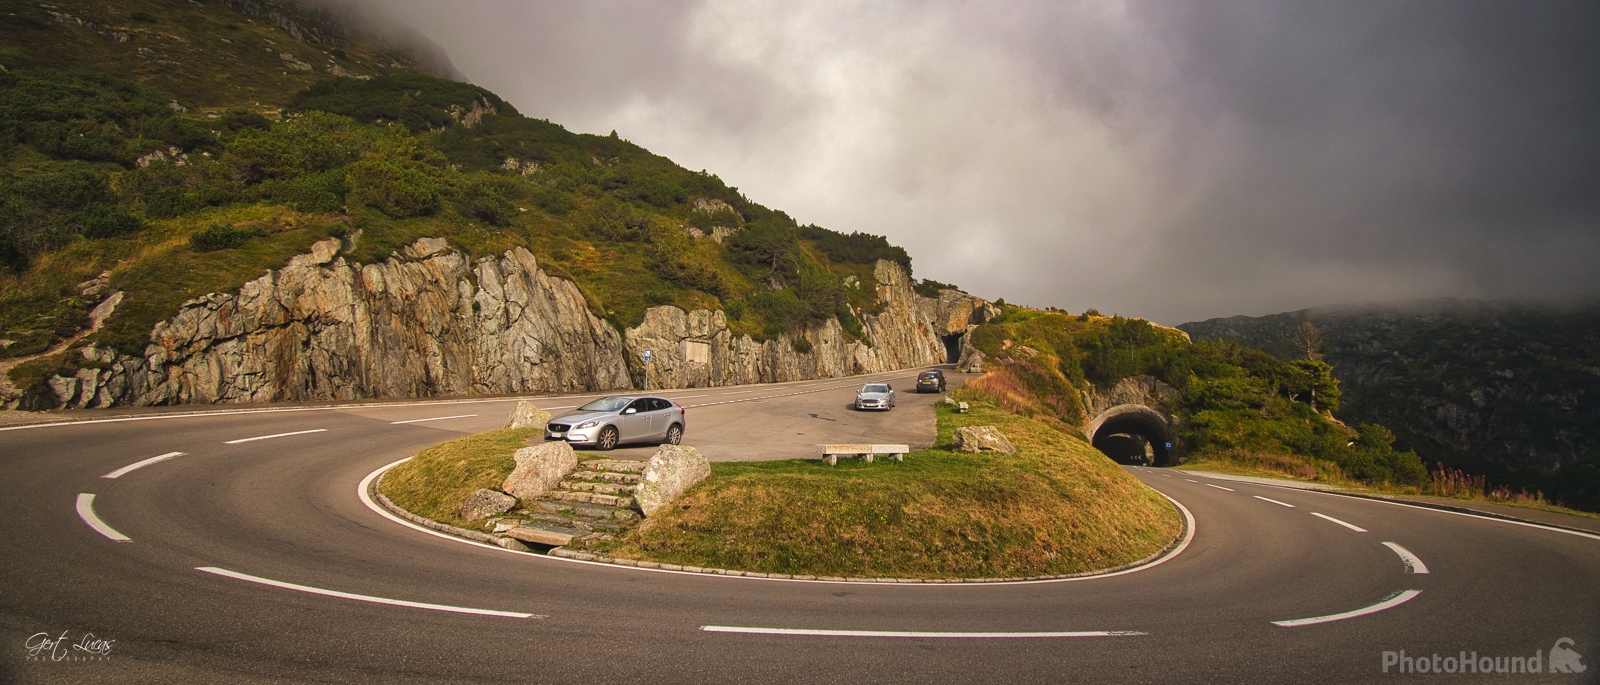 Image of Sustenpass Viewpoint by Gert Lucas